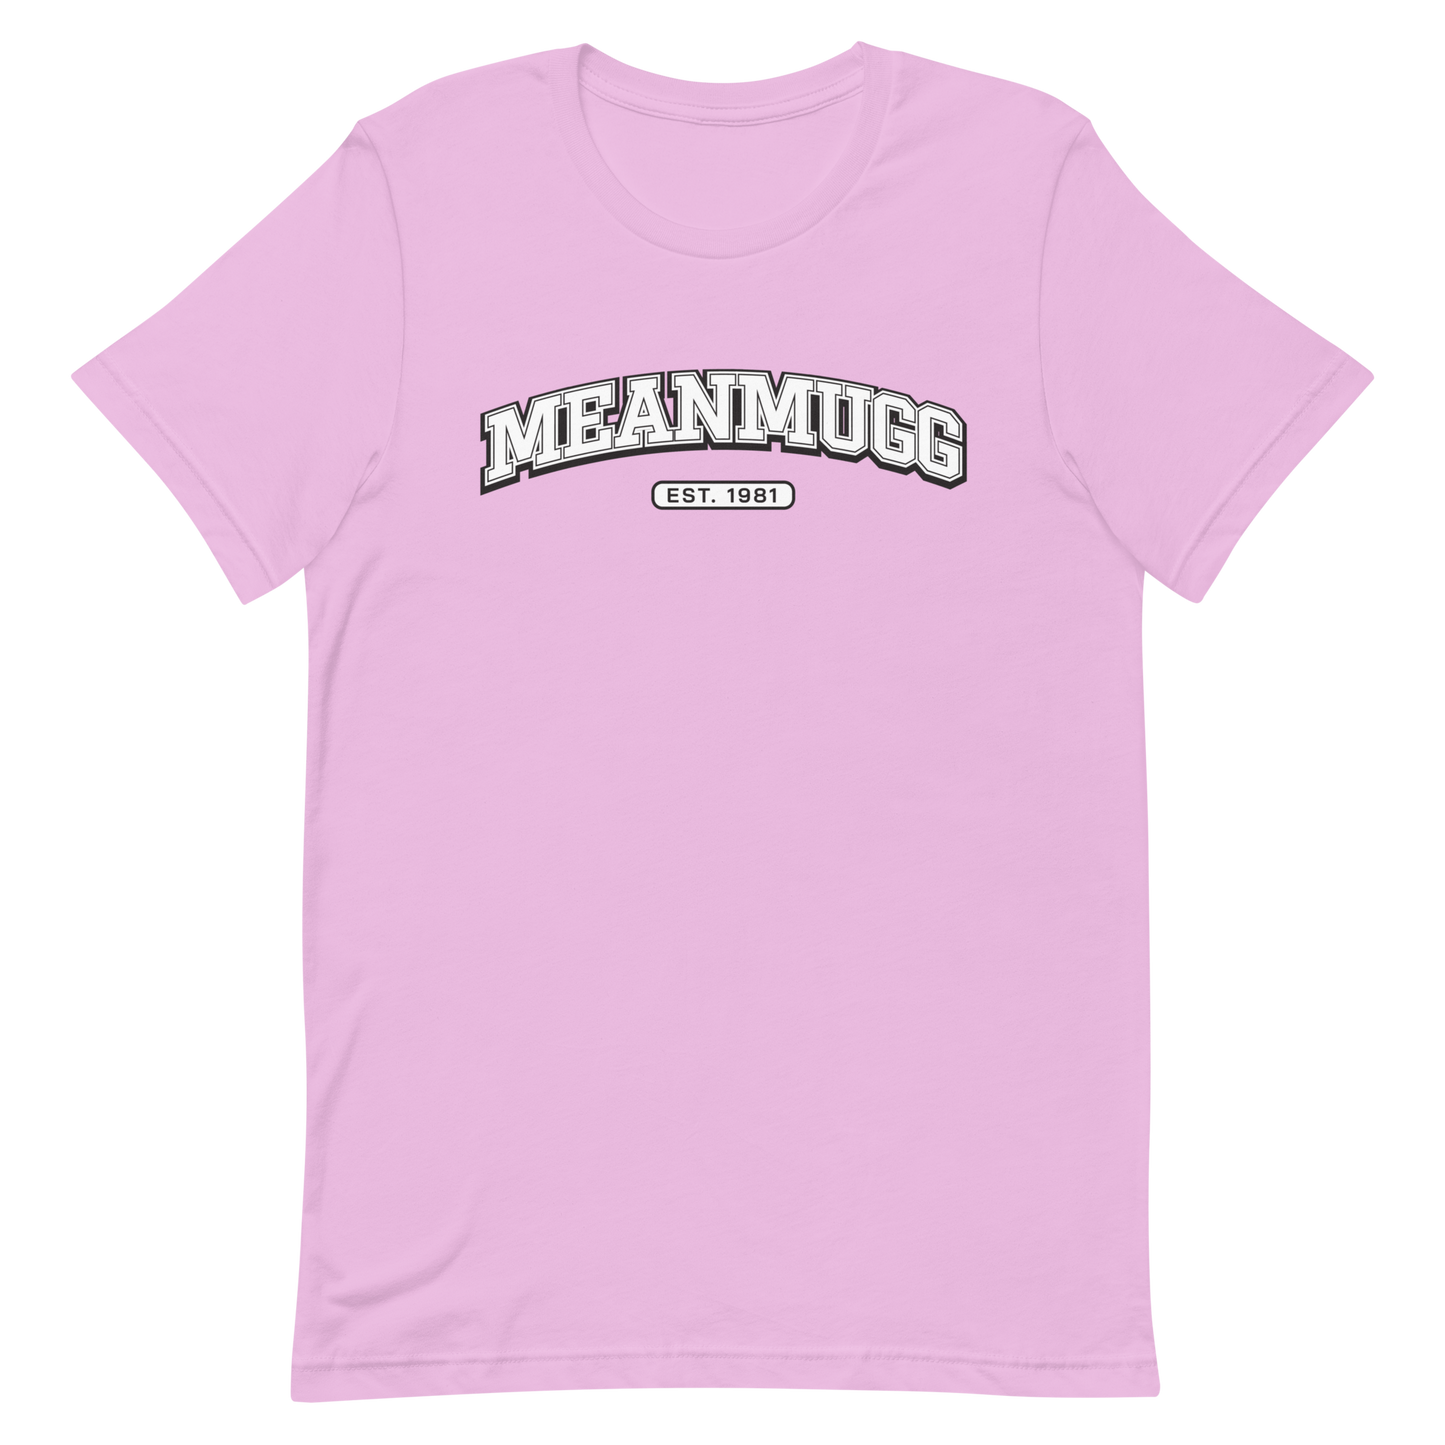 MEANMUGG COLLEGE Tee